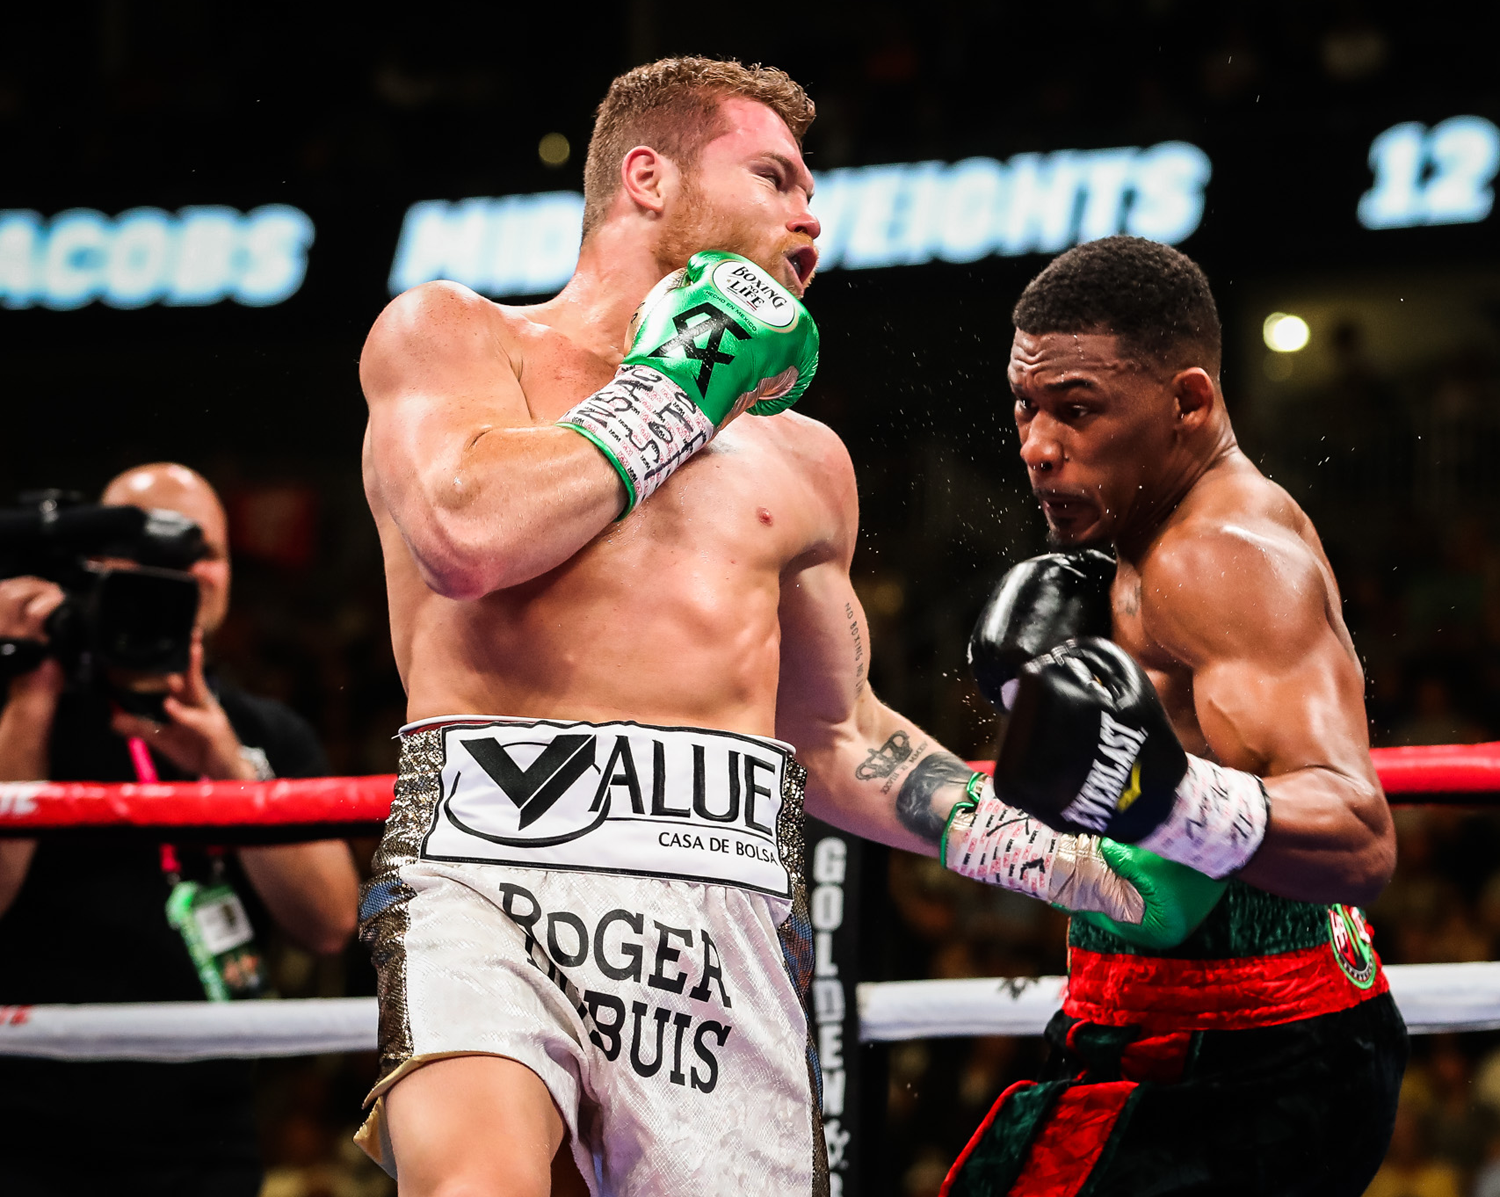 Dazn Dials Up Production Effort In Latest Marquee Canelo Alvarez Fight Night